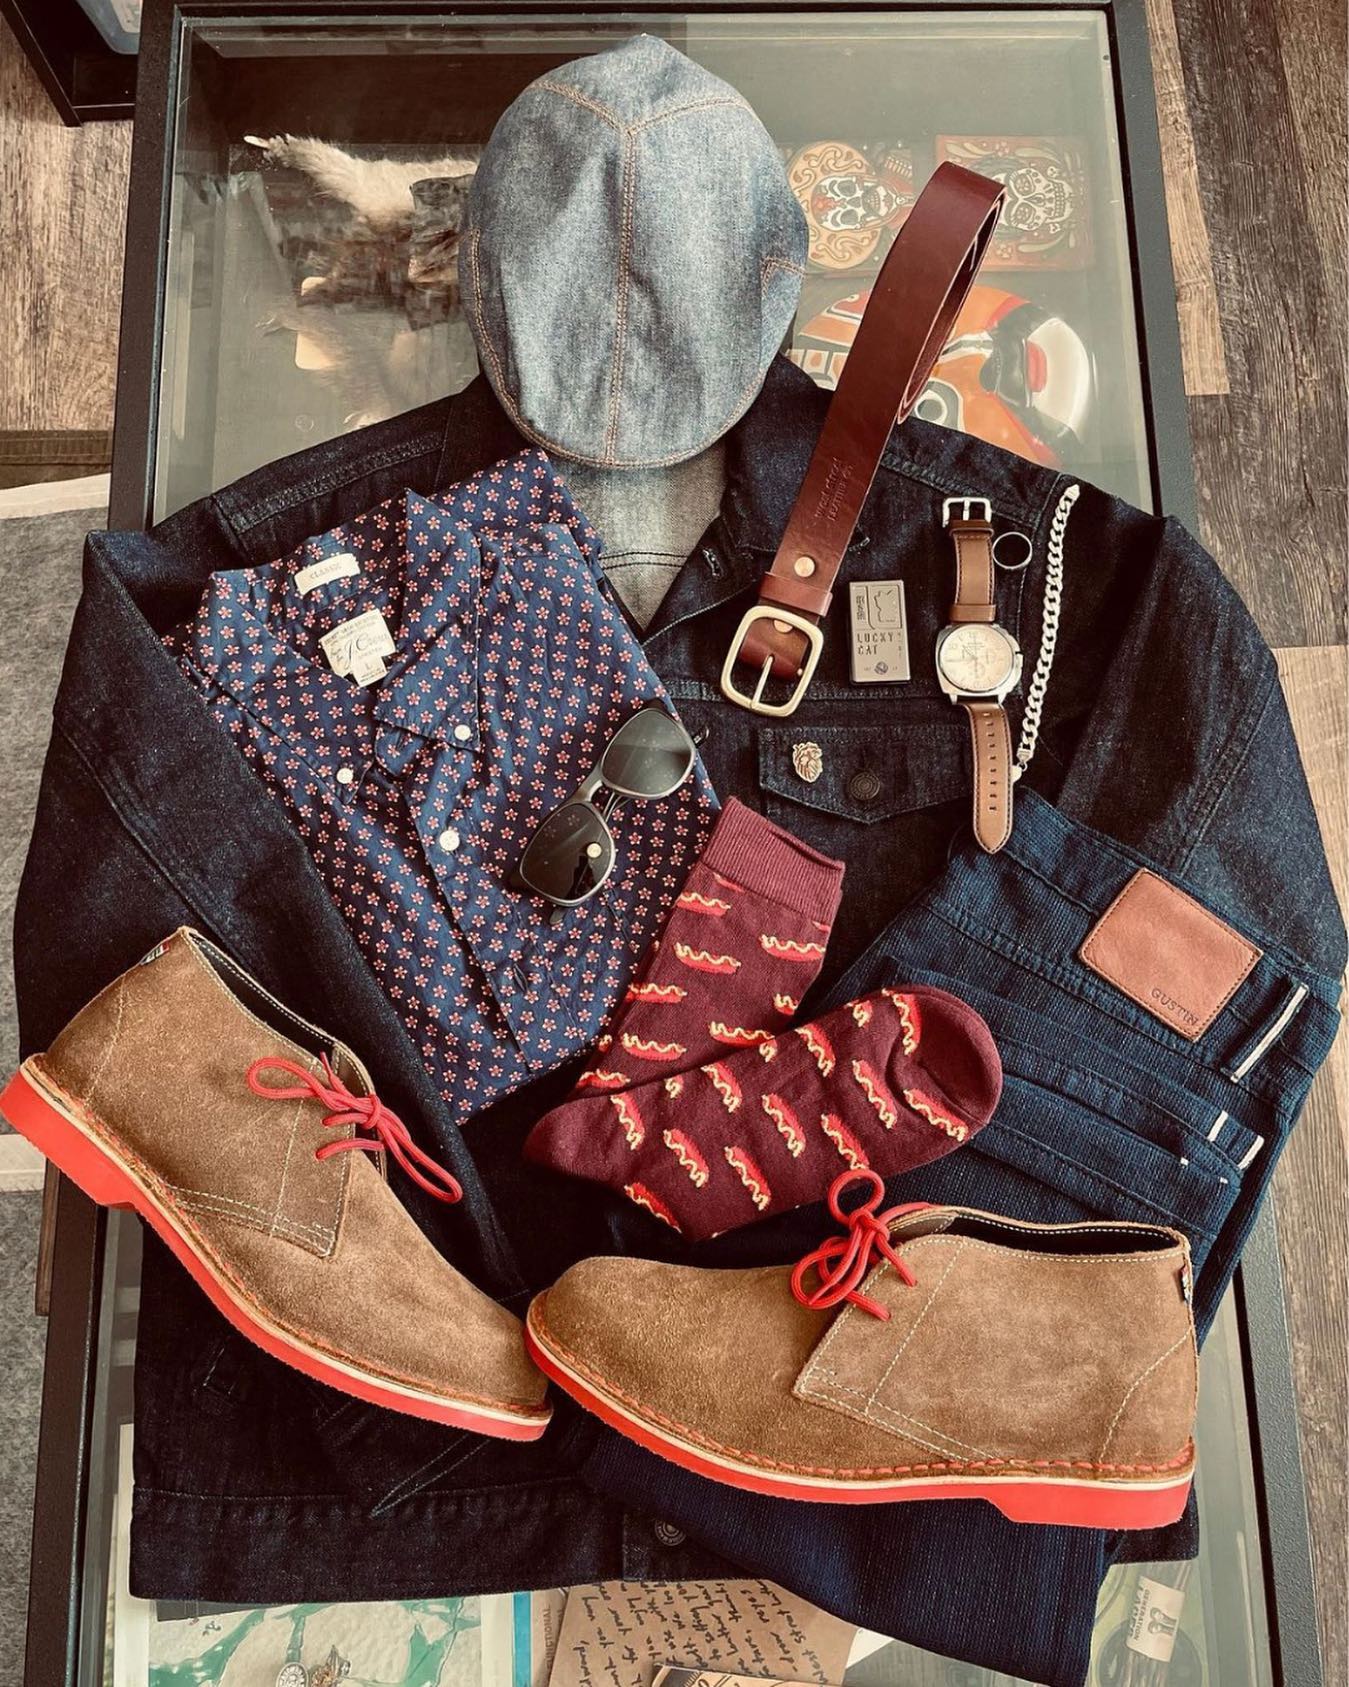 Weekend outfit inspo 📸

#OOTD by @dude_in_denm21! Featuring our men\'s Heritage shoes in red 👞
.
.
.
#ootd #mensfashion #mensshoes #africanfashion #denimstyle #ootdfashion #ootdinspiration